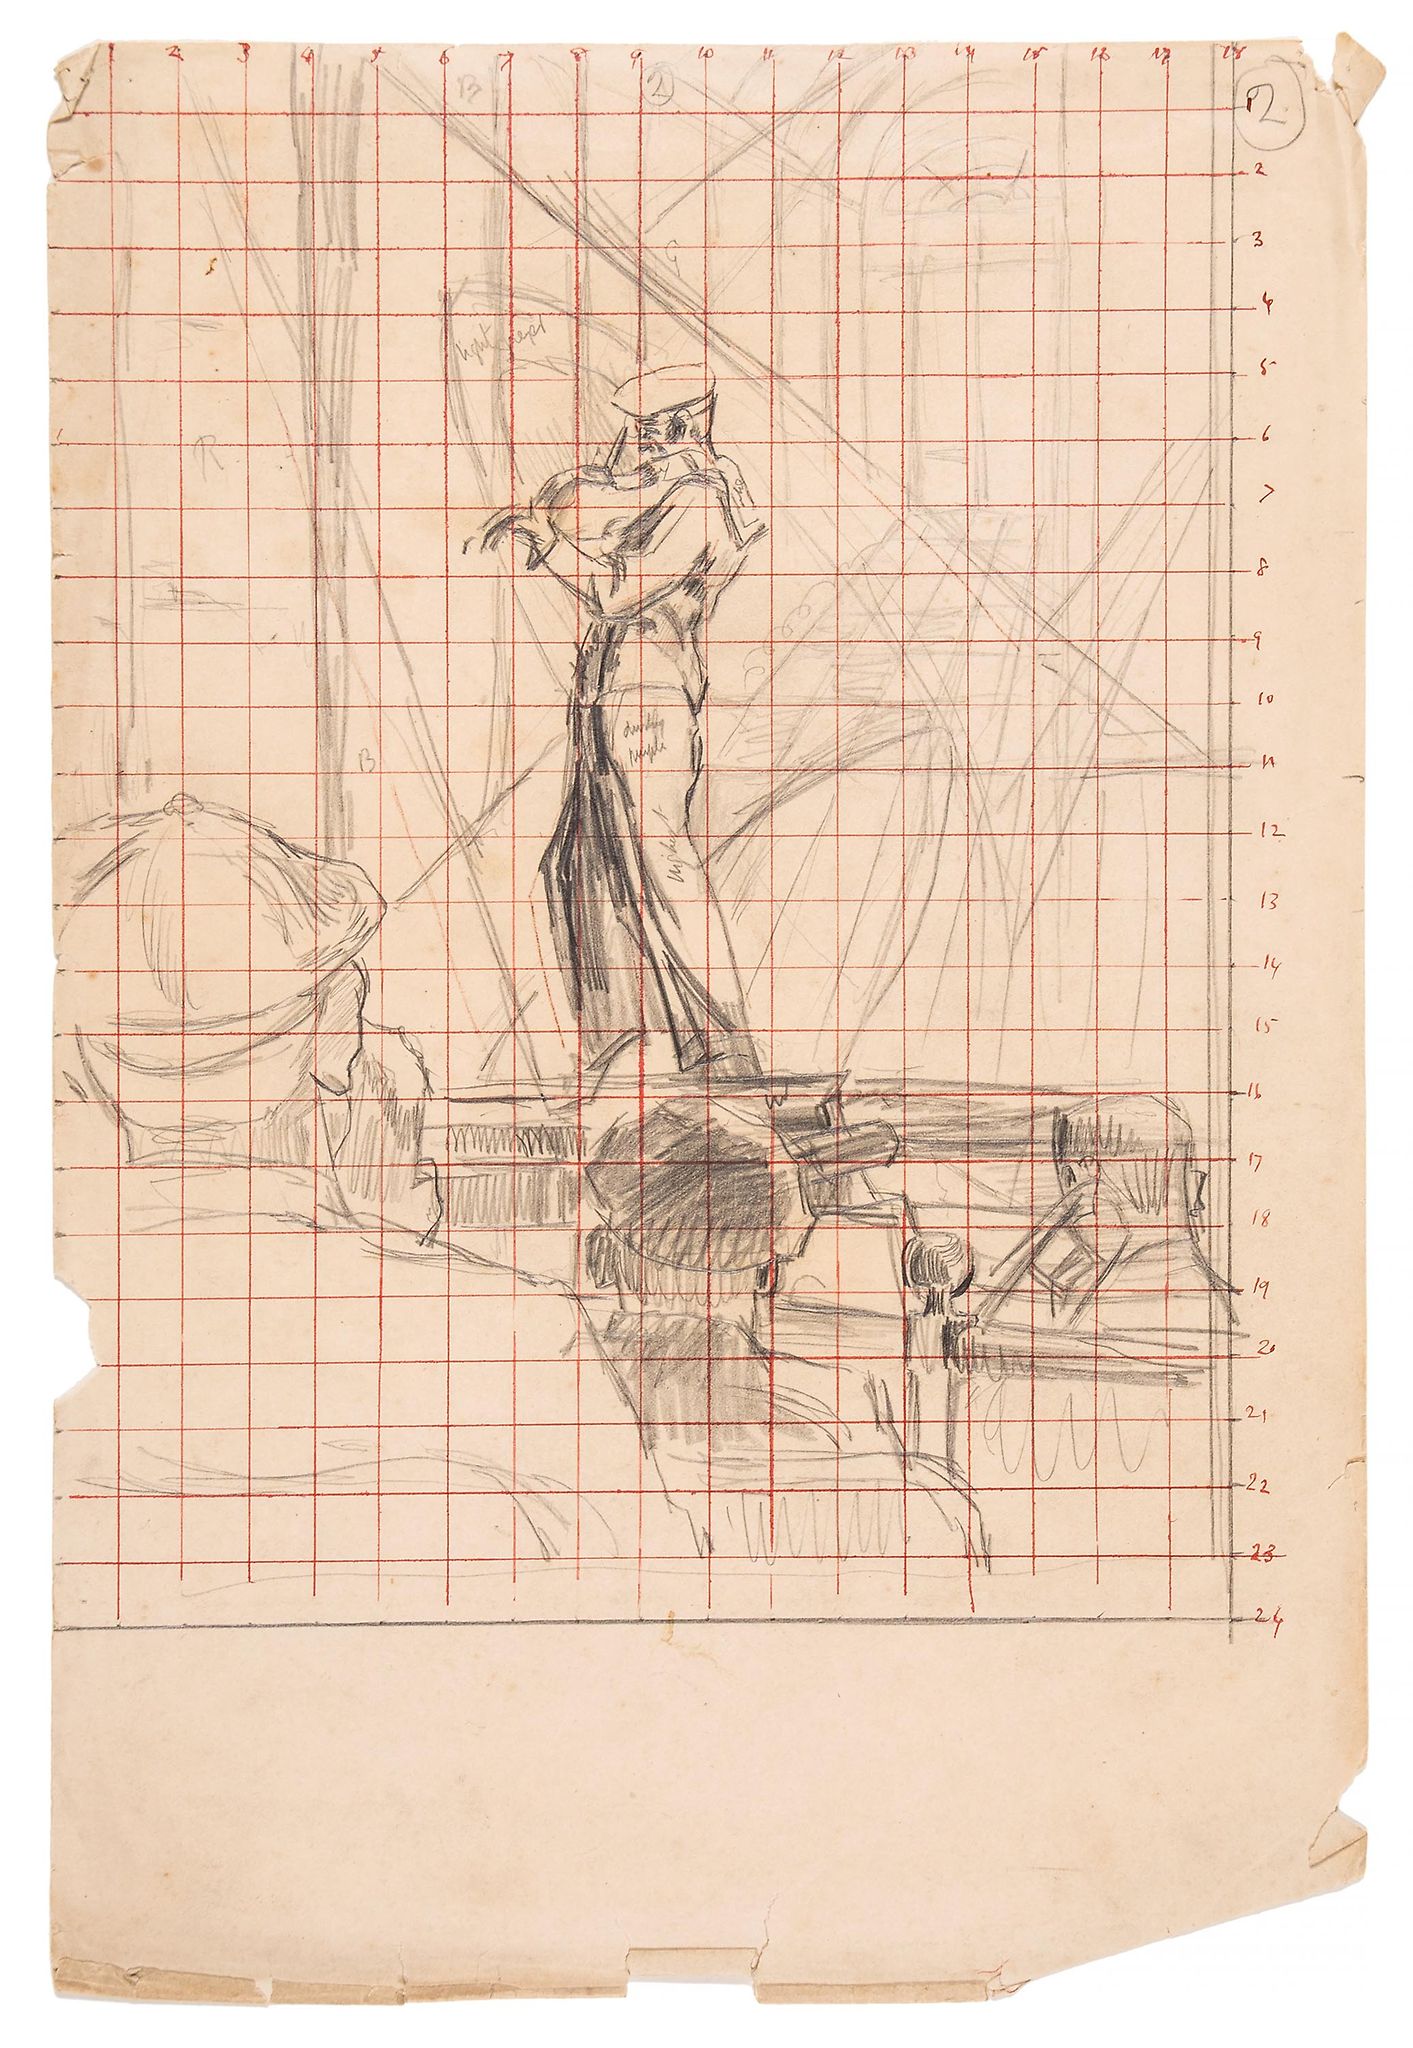 Walter Richard Sickert (1860-1942) - Theatre Performer, 1922-3 pencil on lined paper with